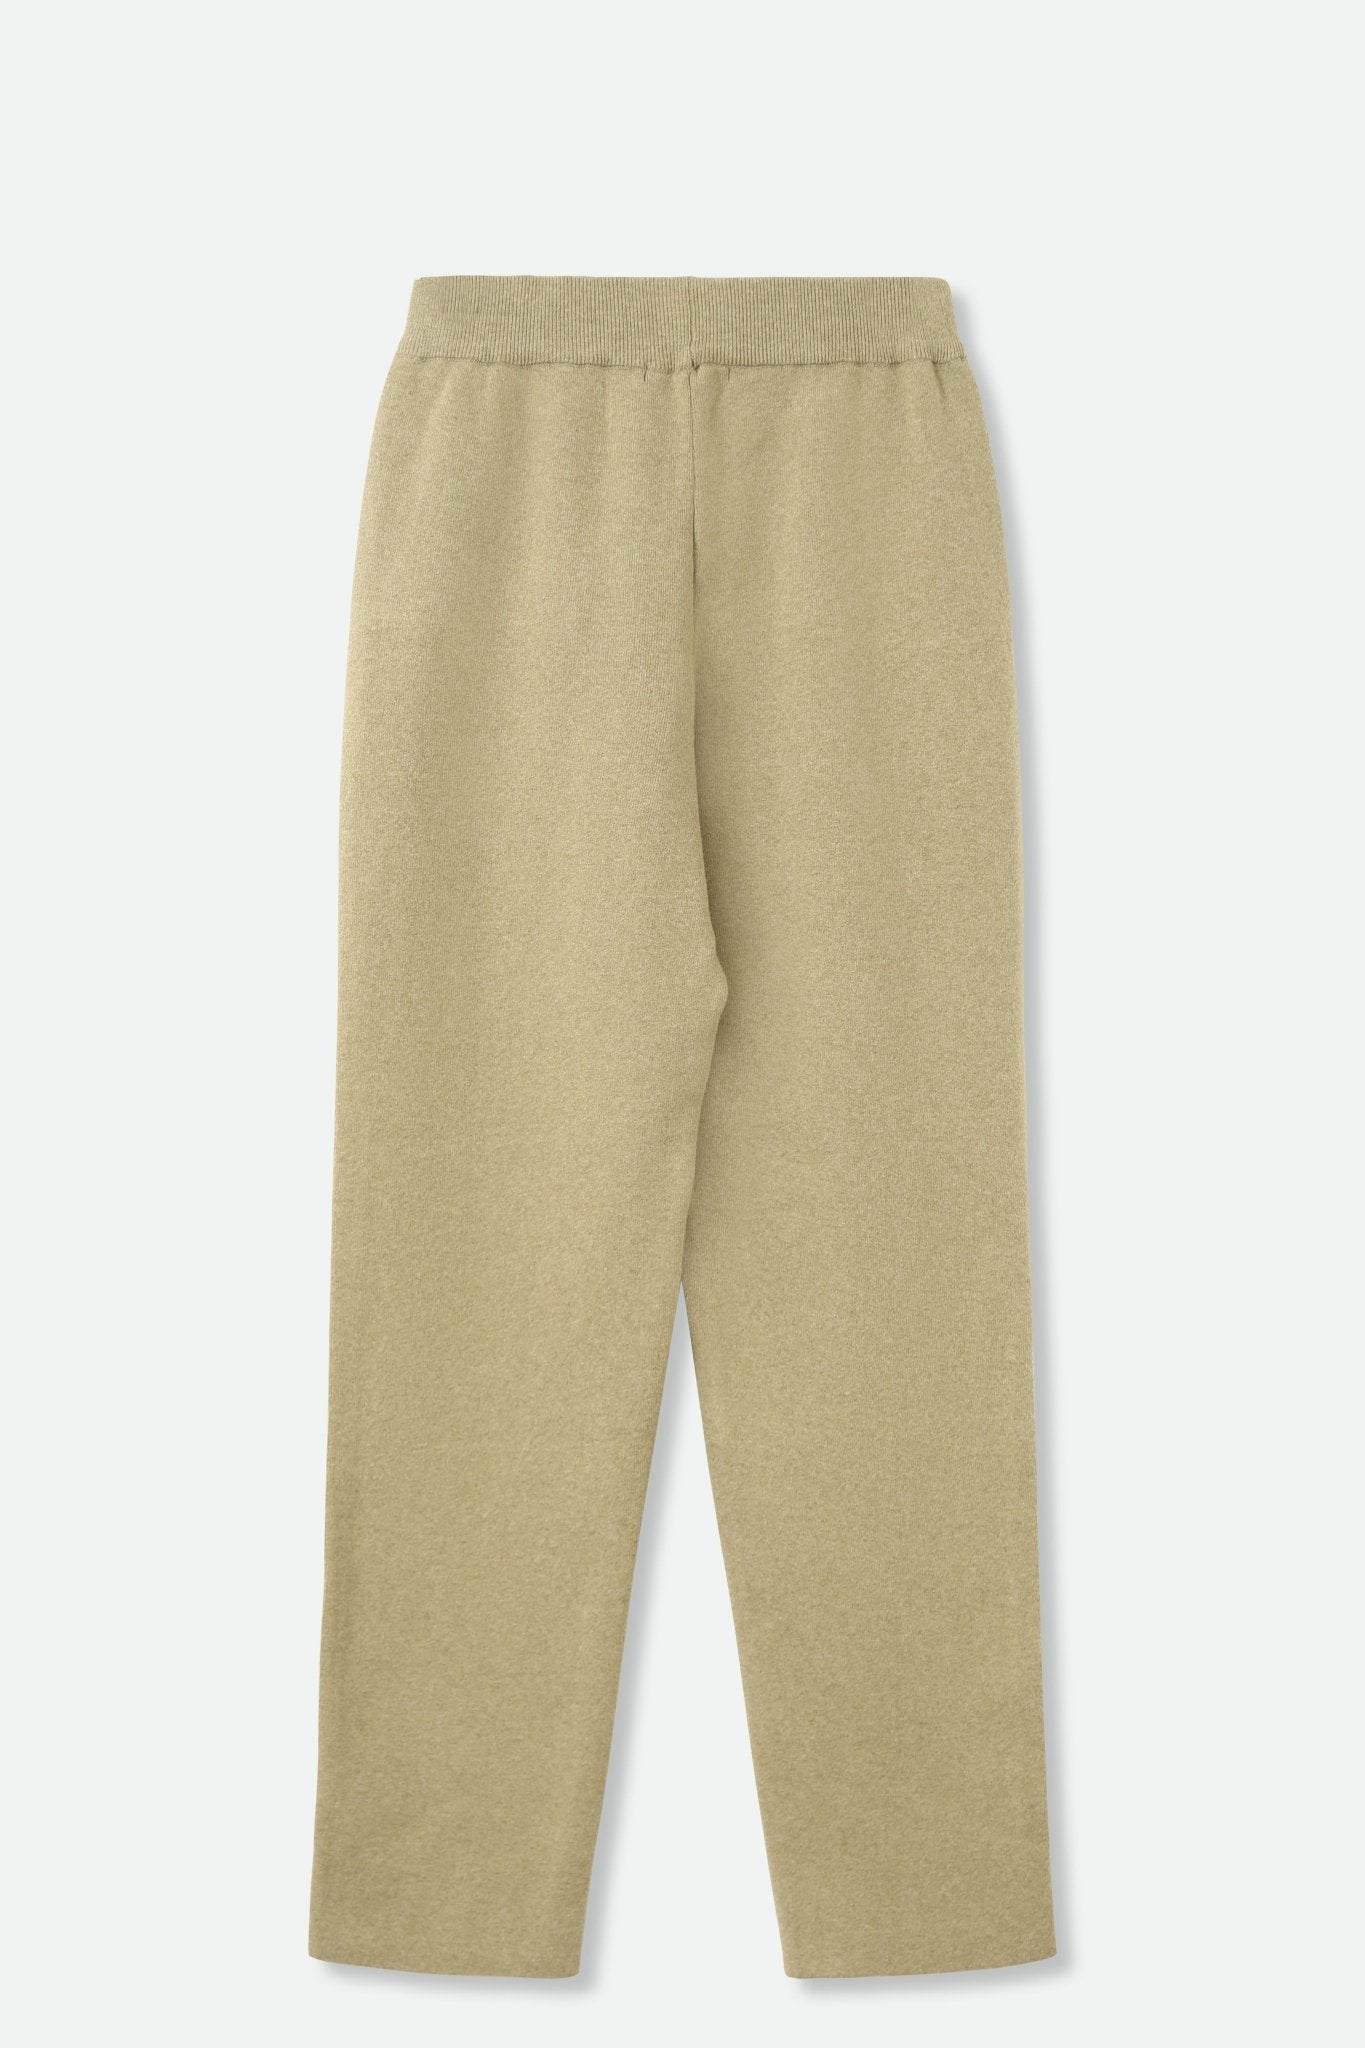 PAIGE PANT IN DOUBLE KNIT HEATHERED PIMA COTTON IN GREEN HEATHER - Jarbo